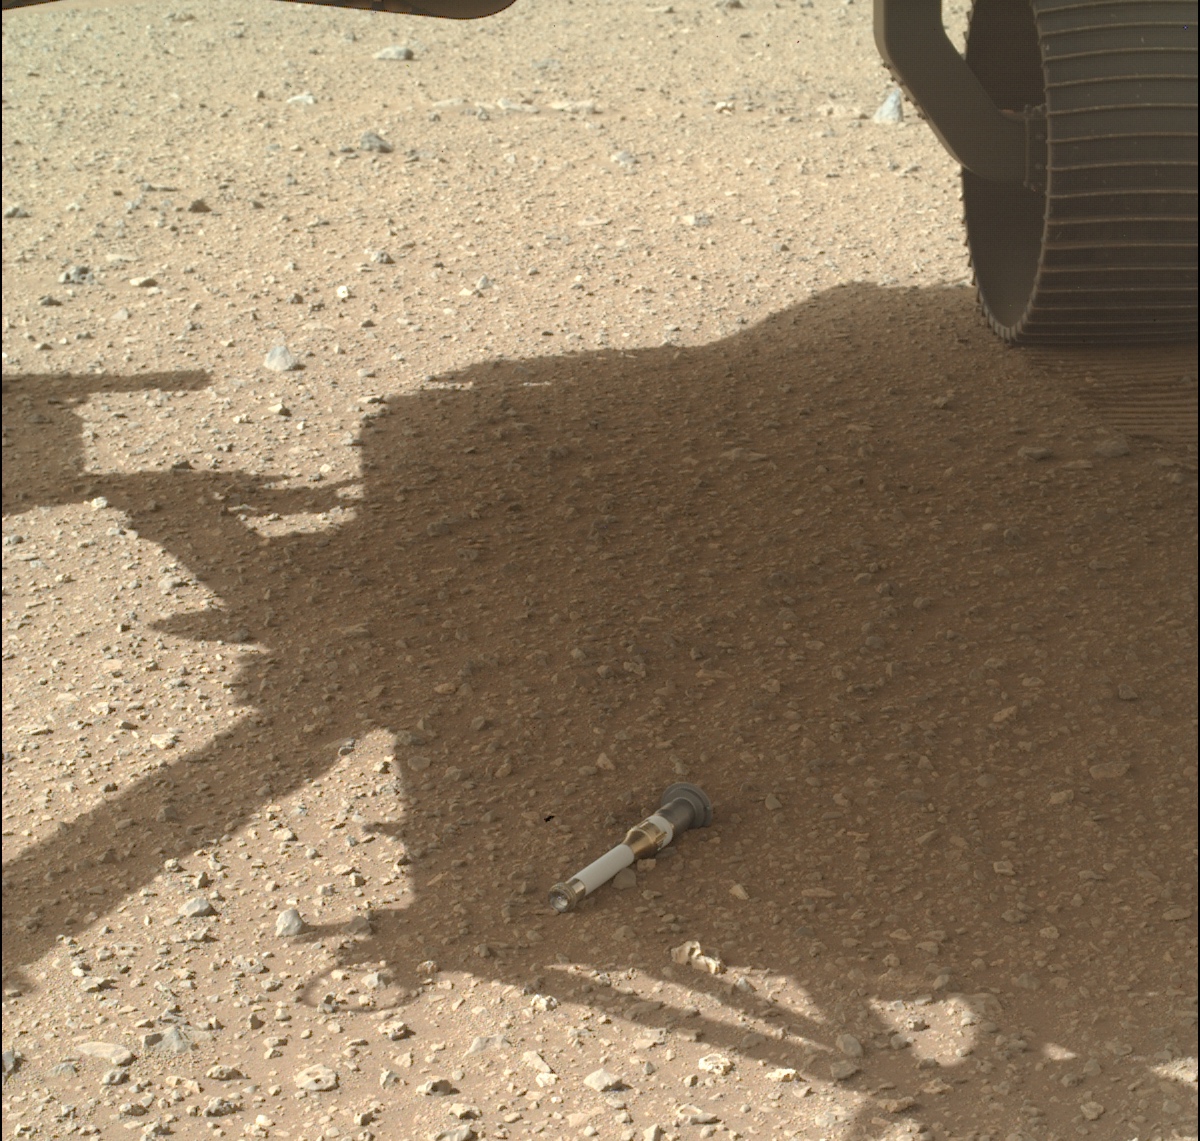 Mars Sample Return science continues amid budget uncertainty